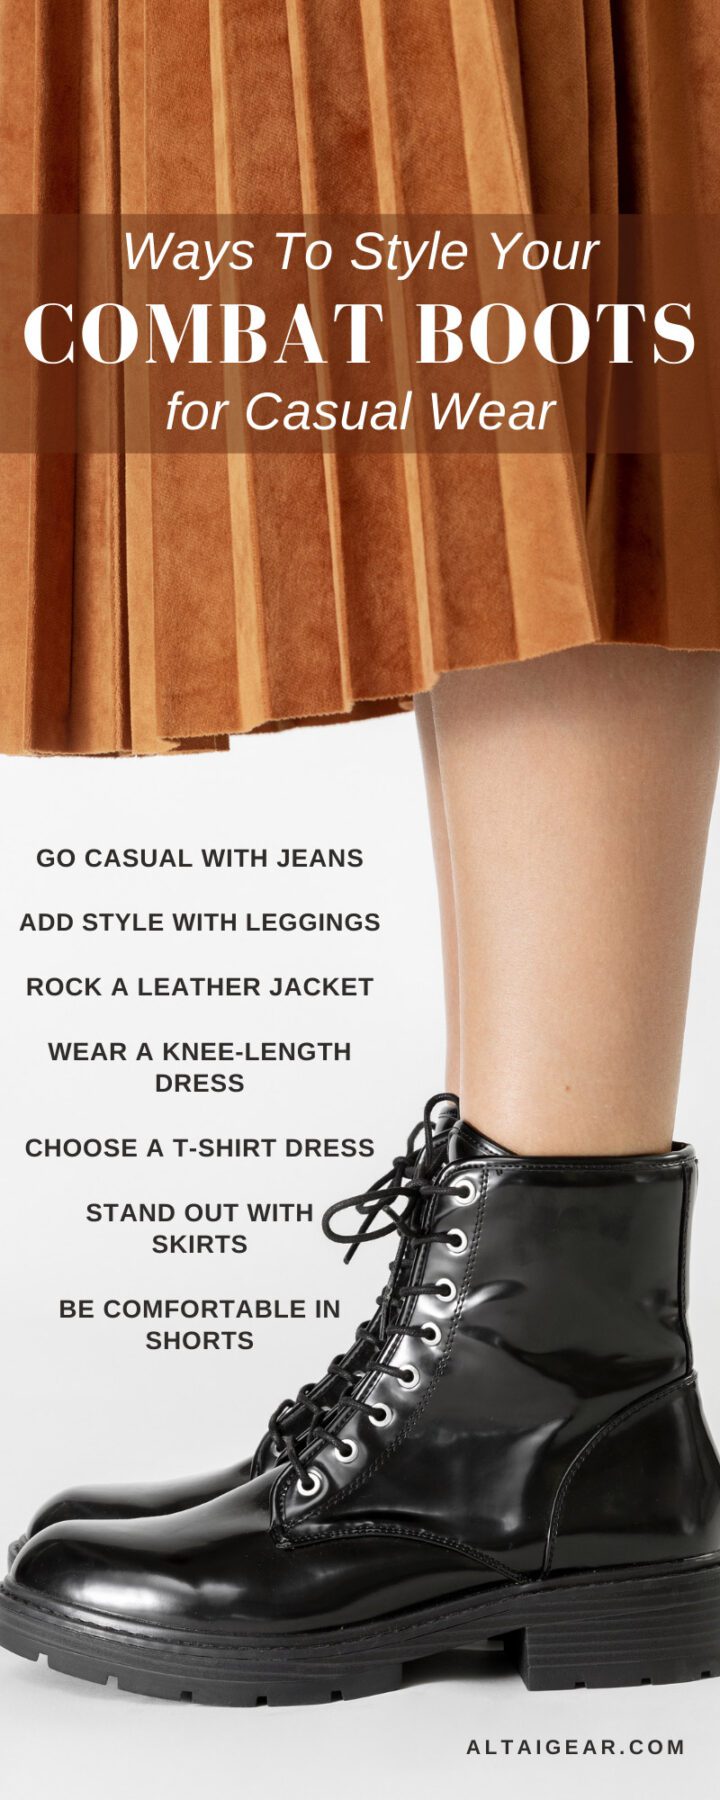 Ways To Style Your Combat Boots for Casual Wear